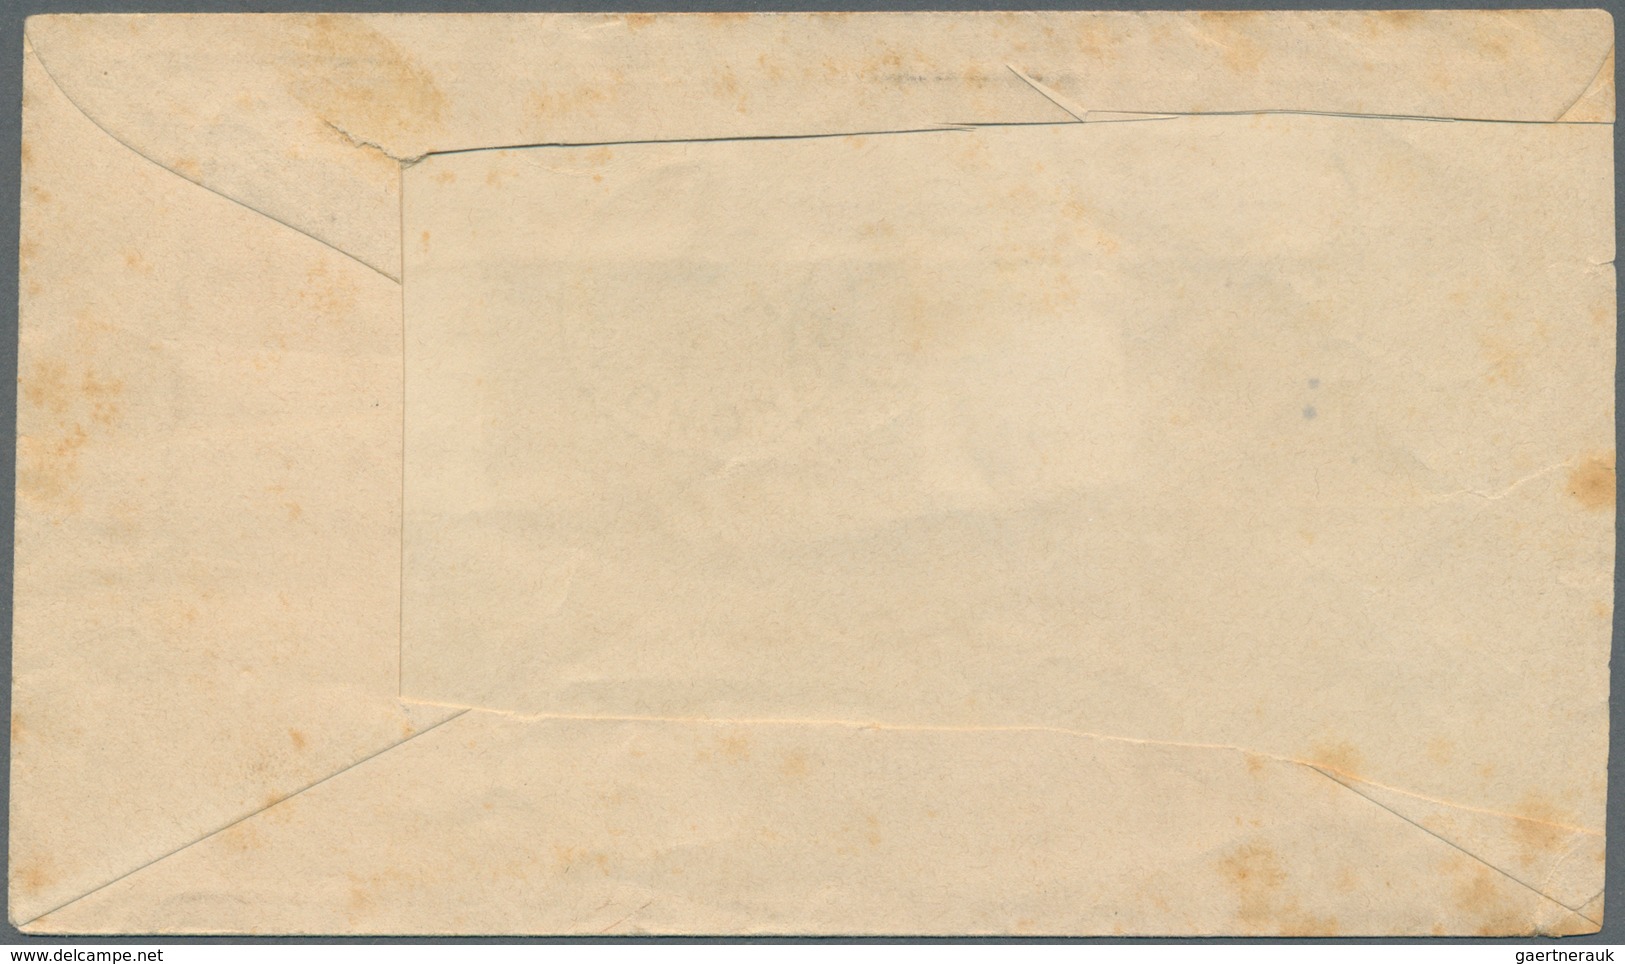 09937A Thailand: 1894, 1 Atts./64 A., Large Lettering, Nine Copies Tied "BANGKOK2 30 12 93" On Cover (back - Thaïlande